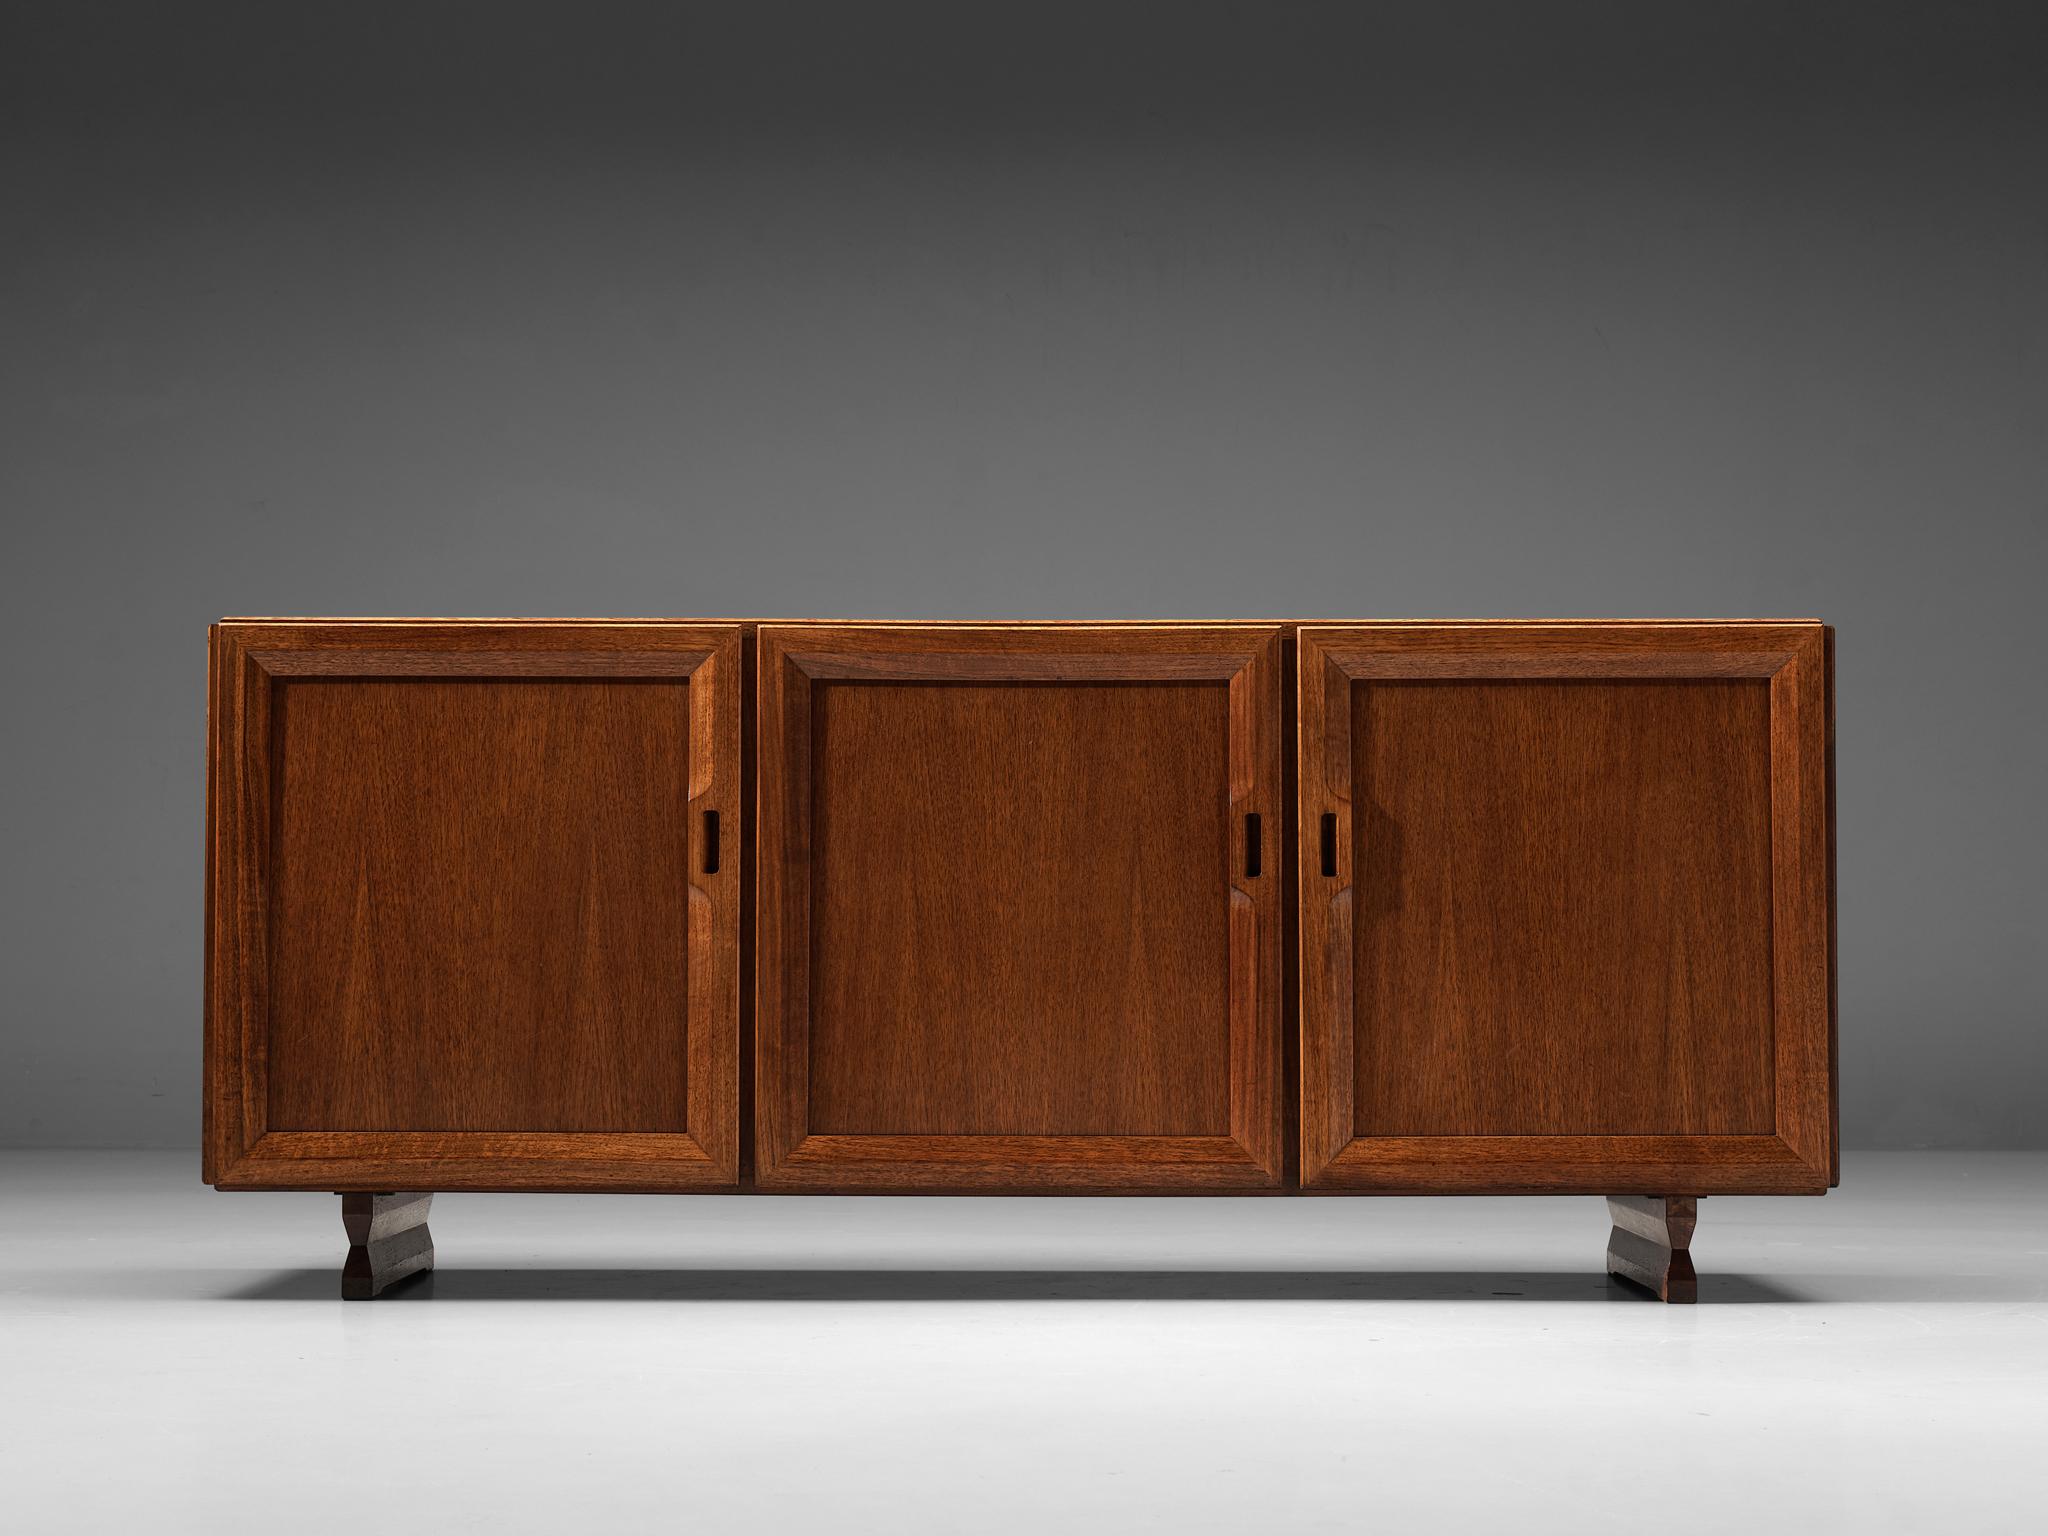 Franco Albini for Poggi, sideboard MB 51, teak, Italy, 1950

Well-designed long sideboard by Franco Albini for Poggi, which features a simplistic design with sharp lines. This modern sideboard has four compartments which you can access through the